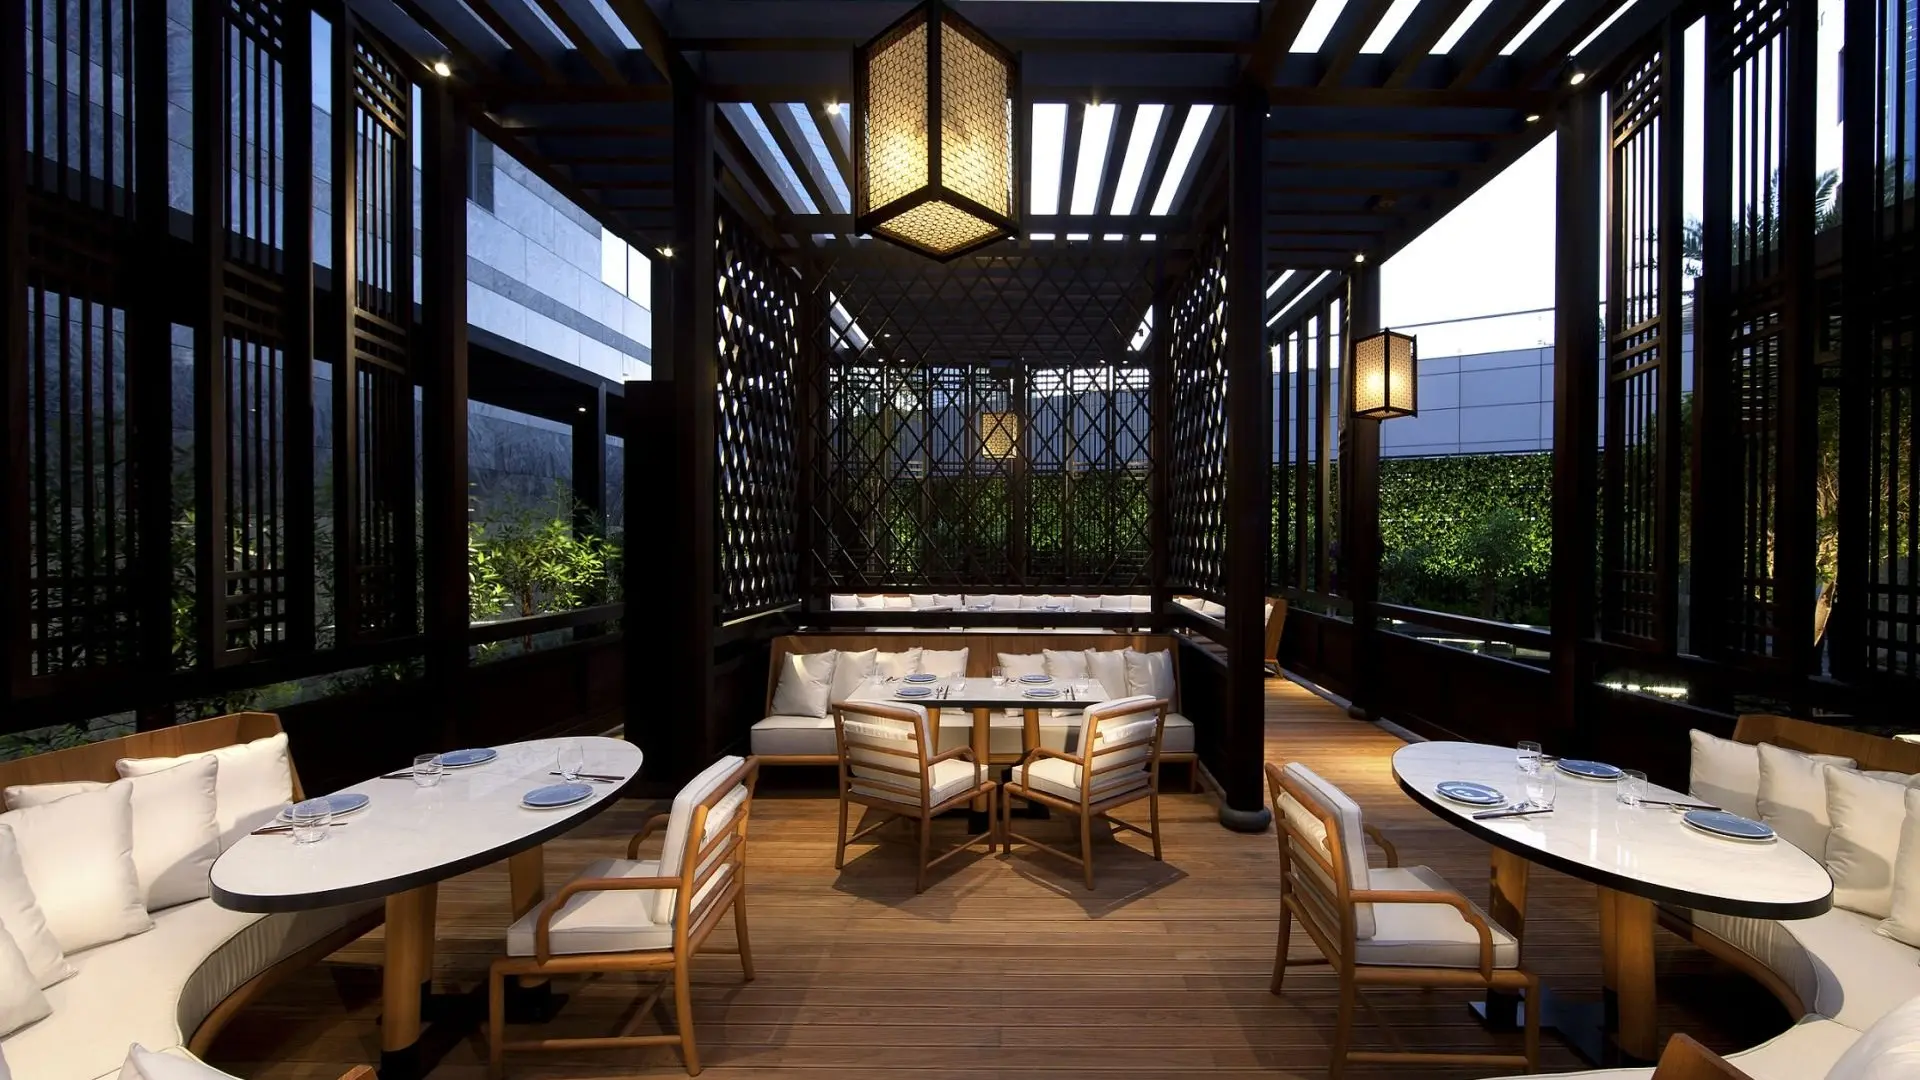 Hakkasan resturant in dubai with black walls and tree chairs